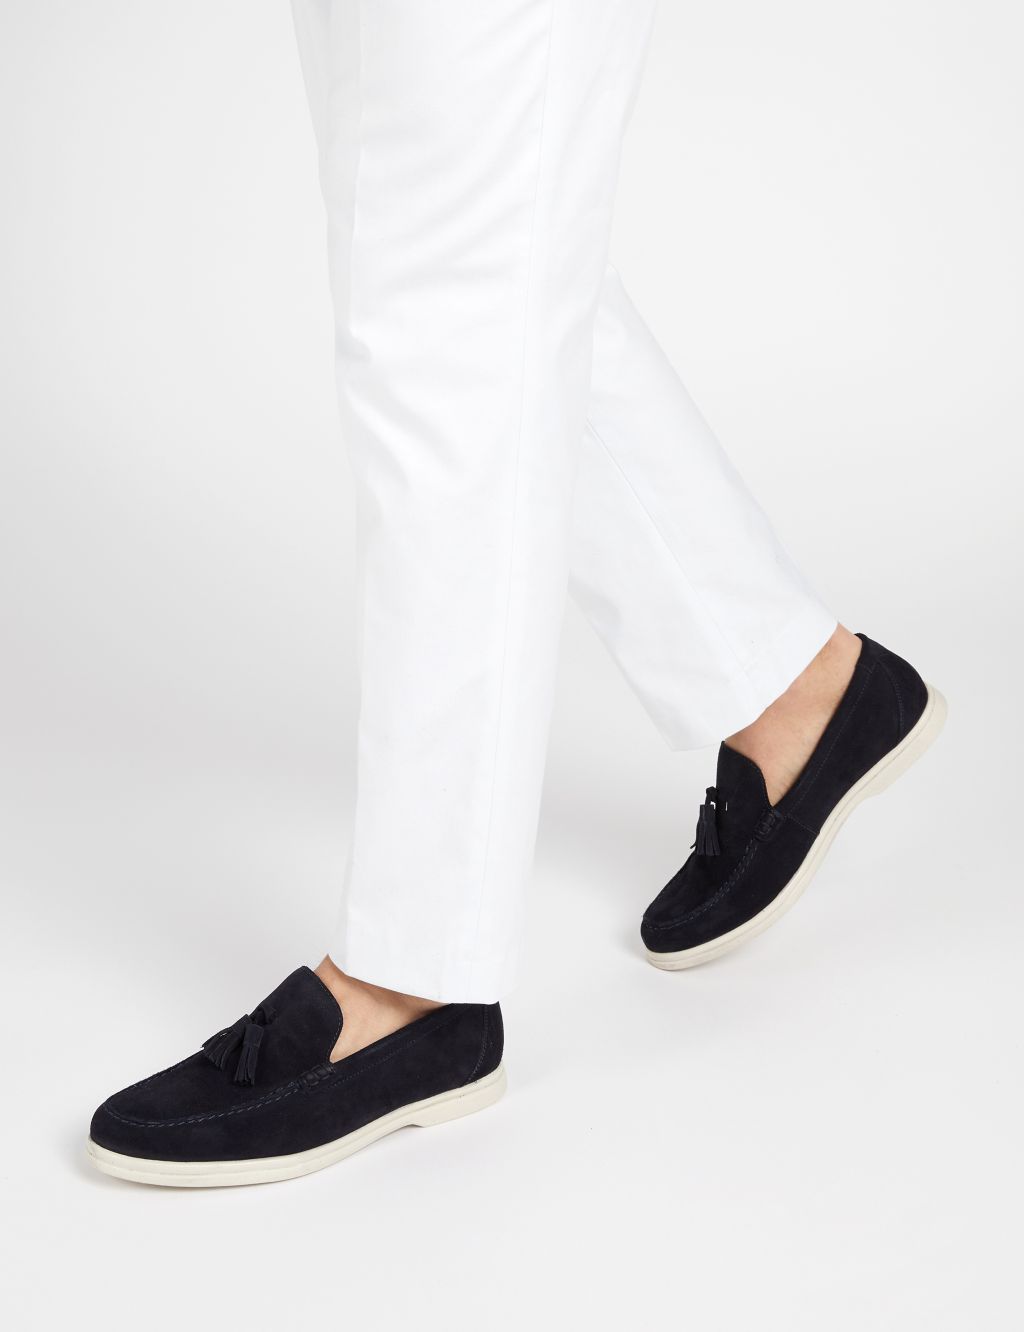 Suede Slip On Loafers image 1